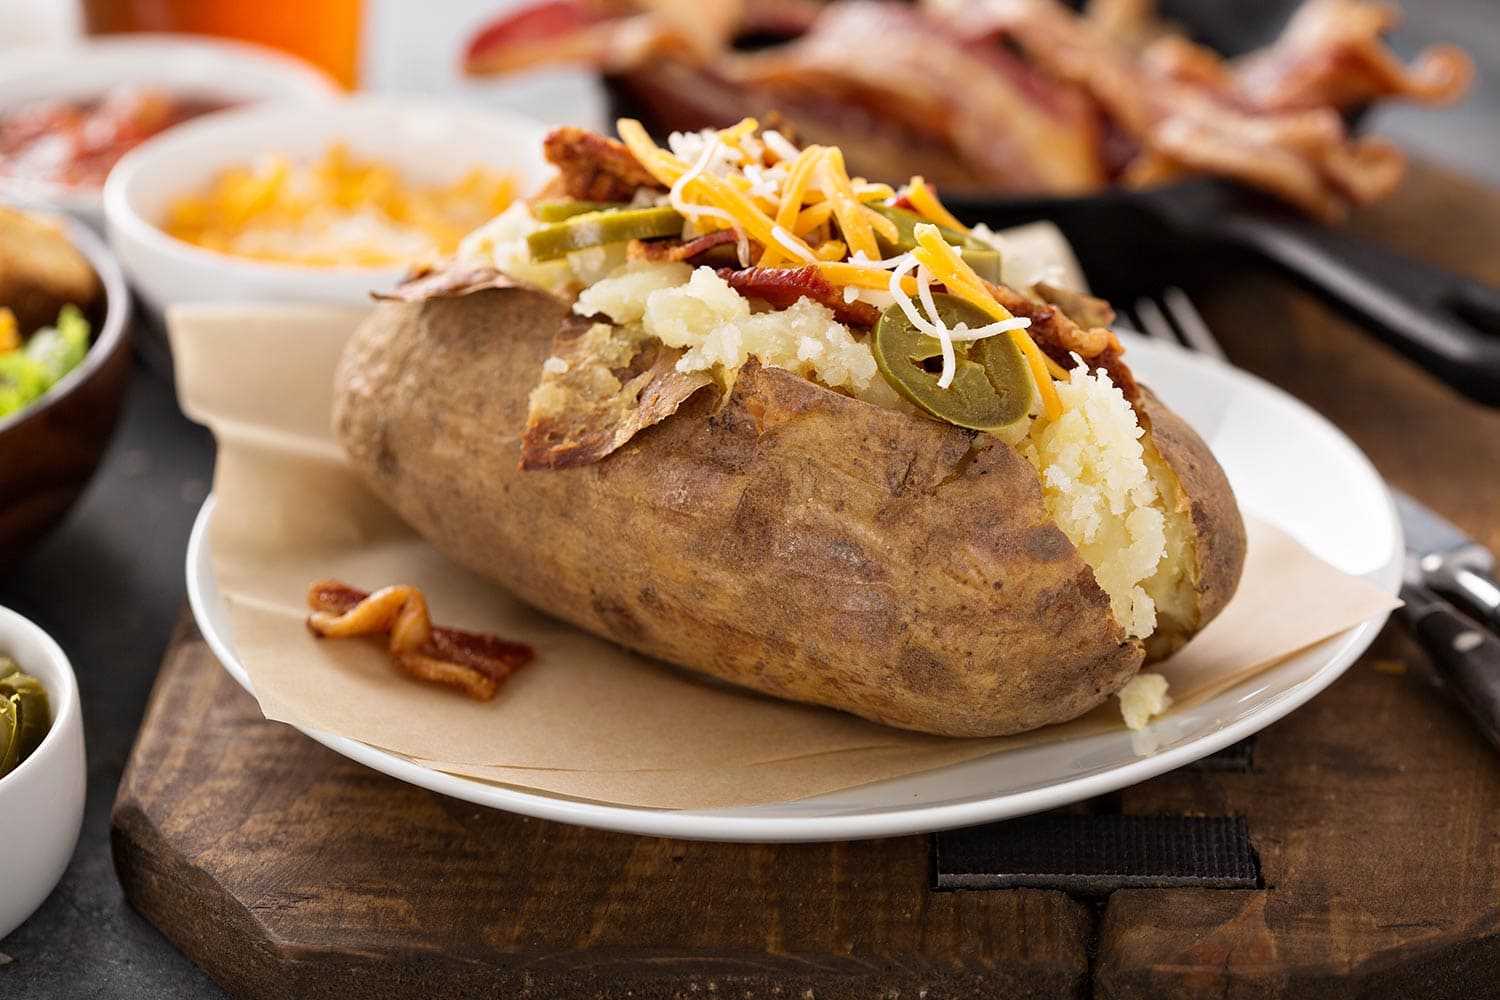 Fully loaded baked potato with all the toppings